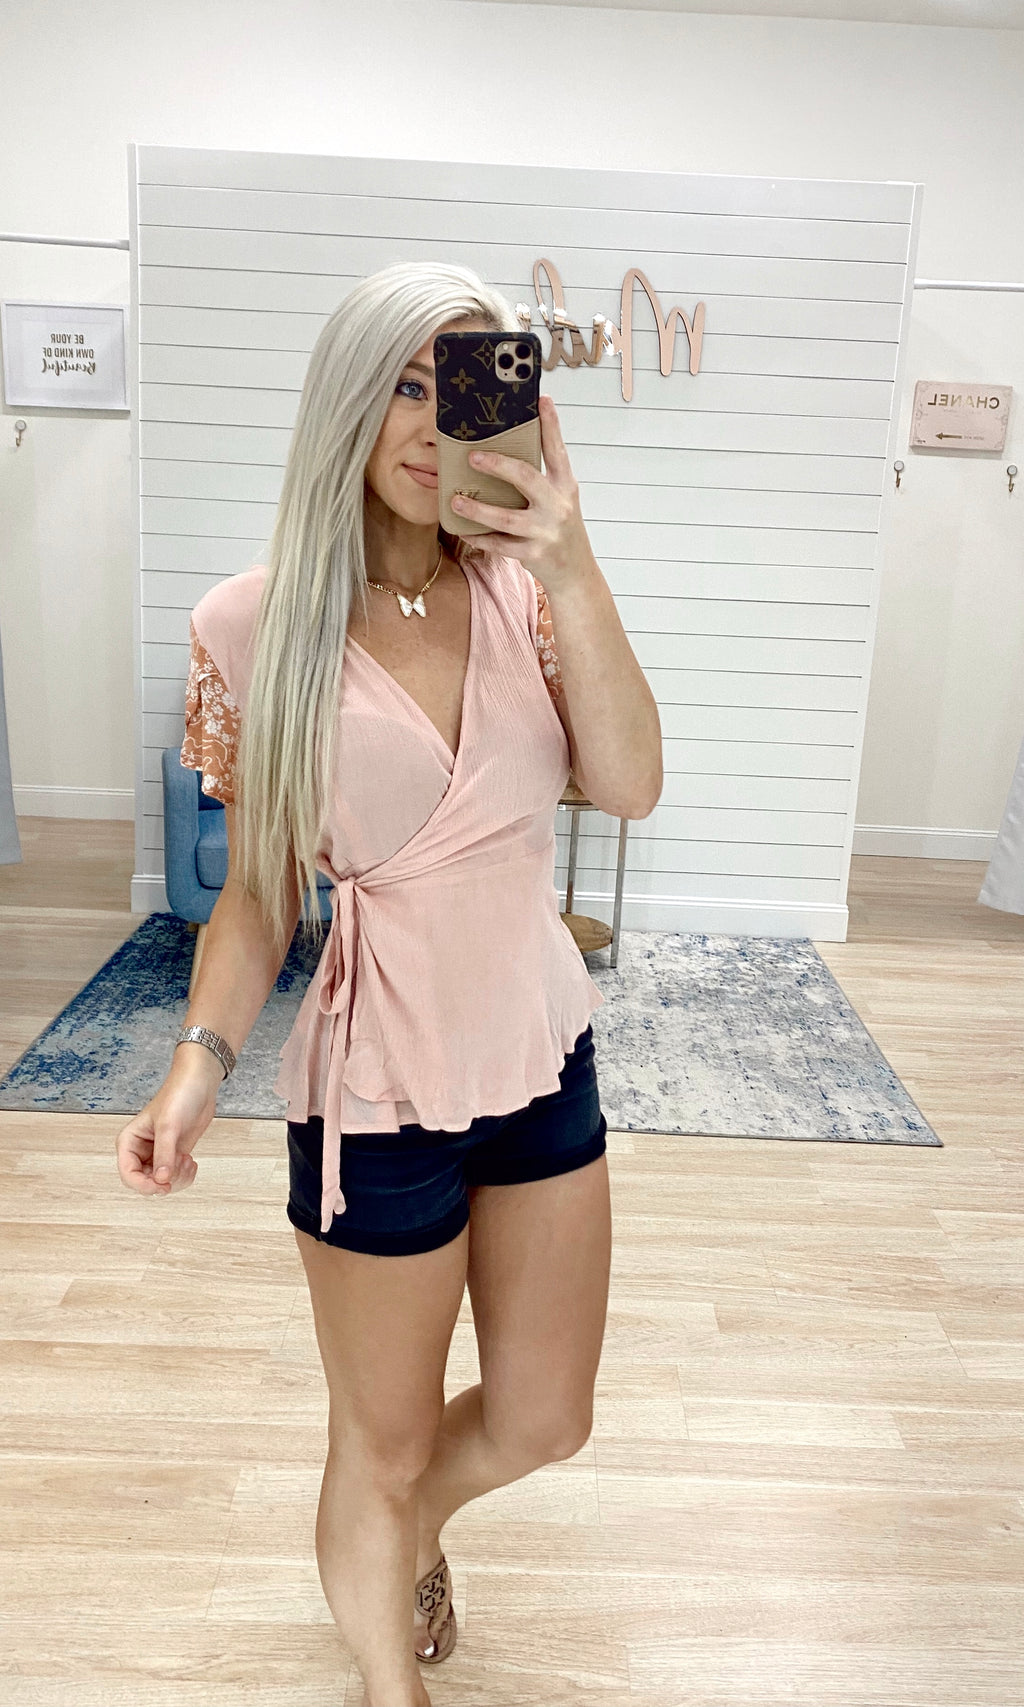 Adored By Me Wrap Top - Light Pink